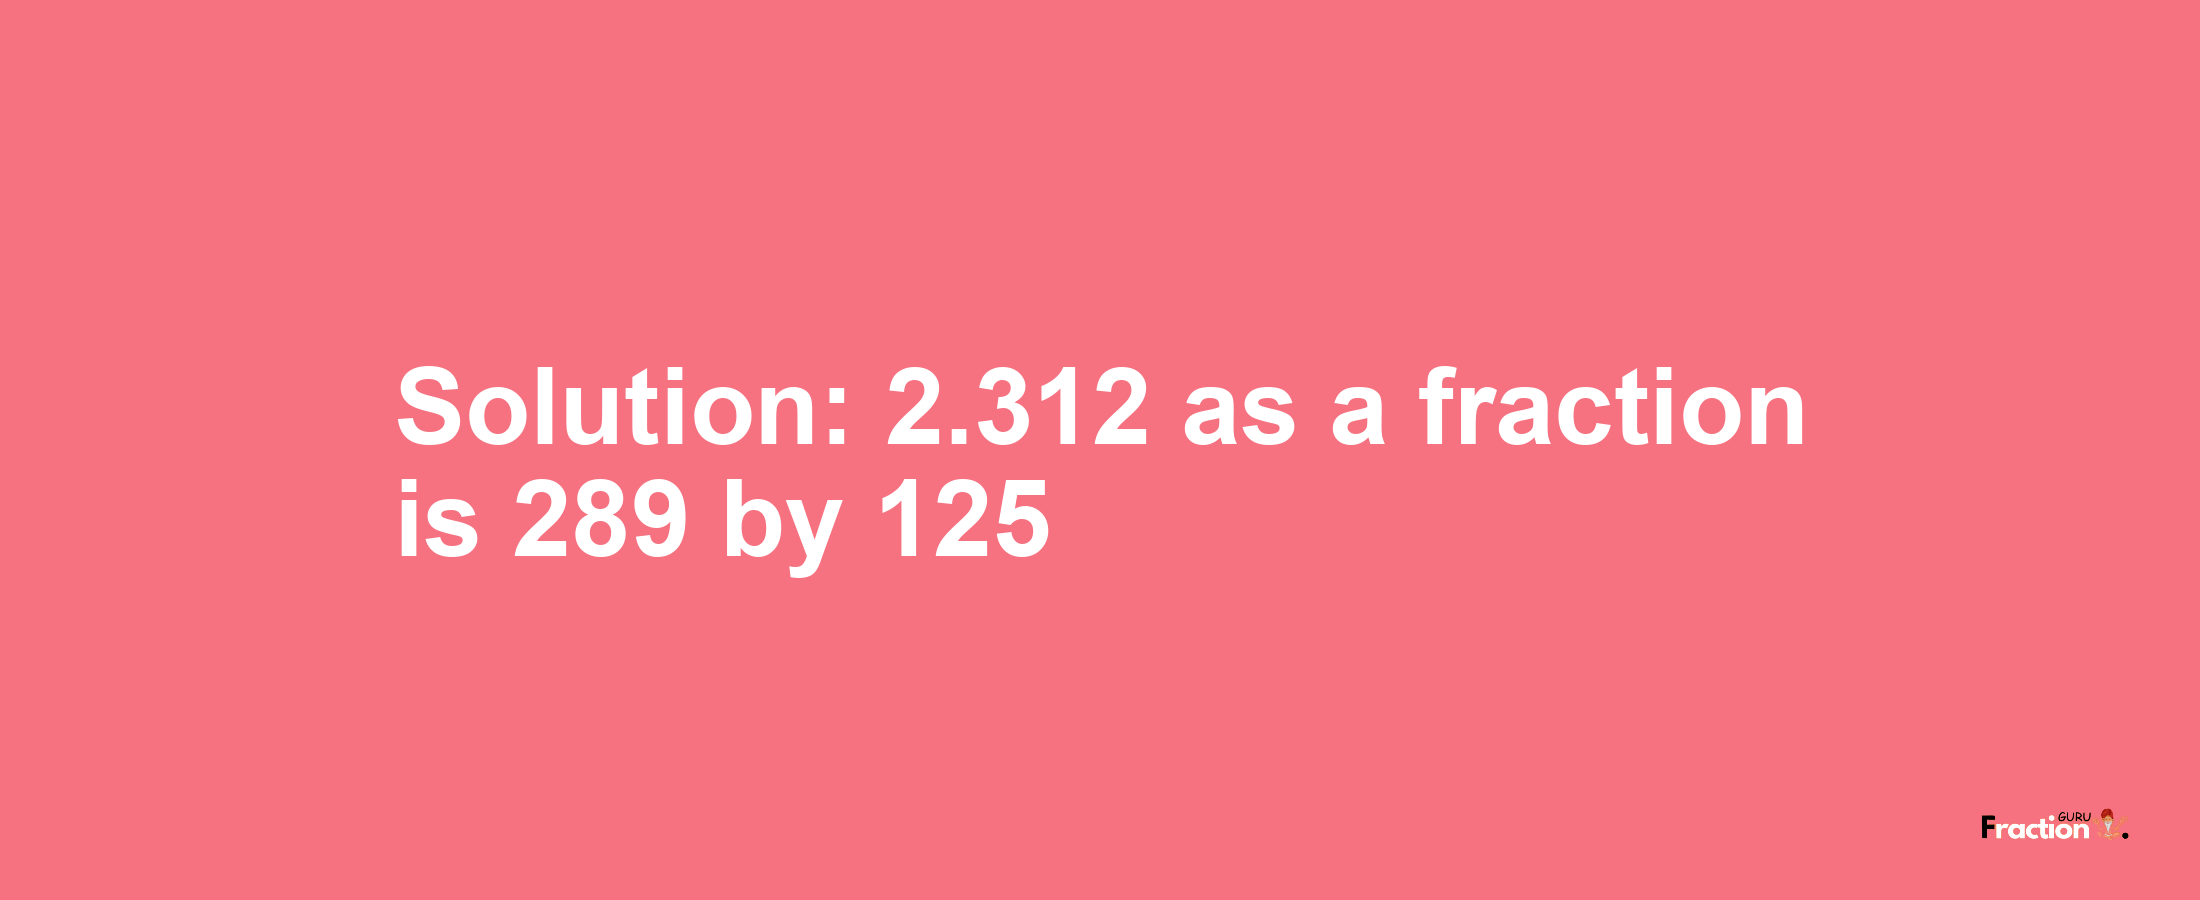 Solution:2.312 as a fraction is 289/125